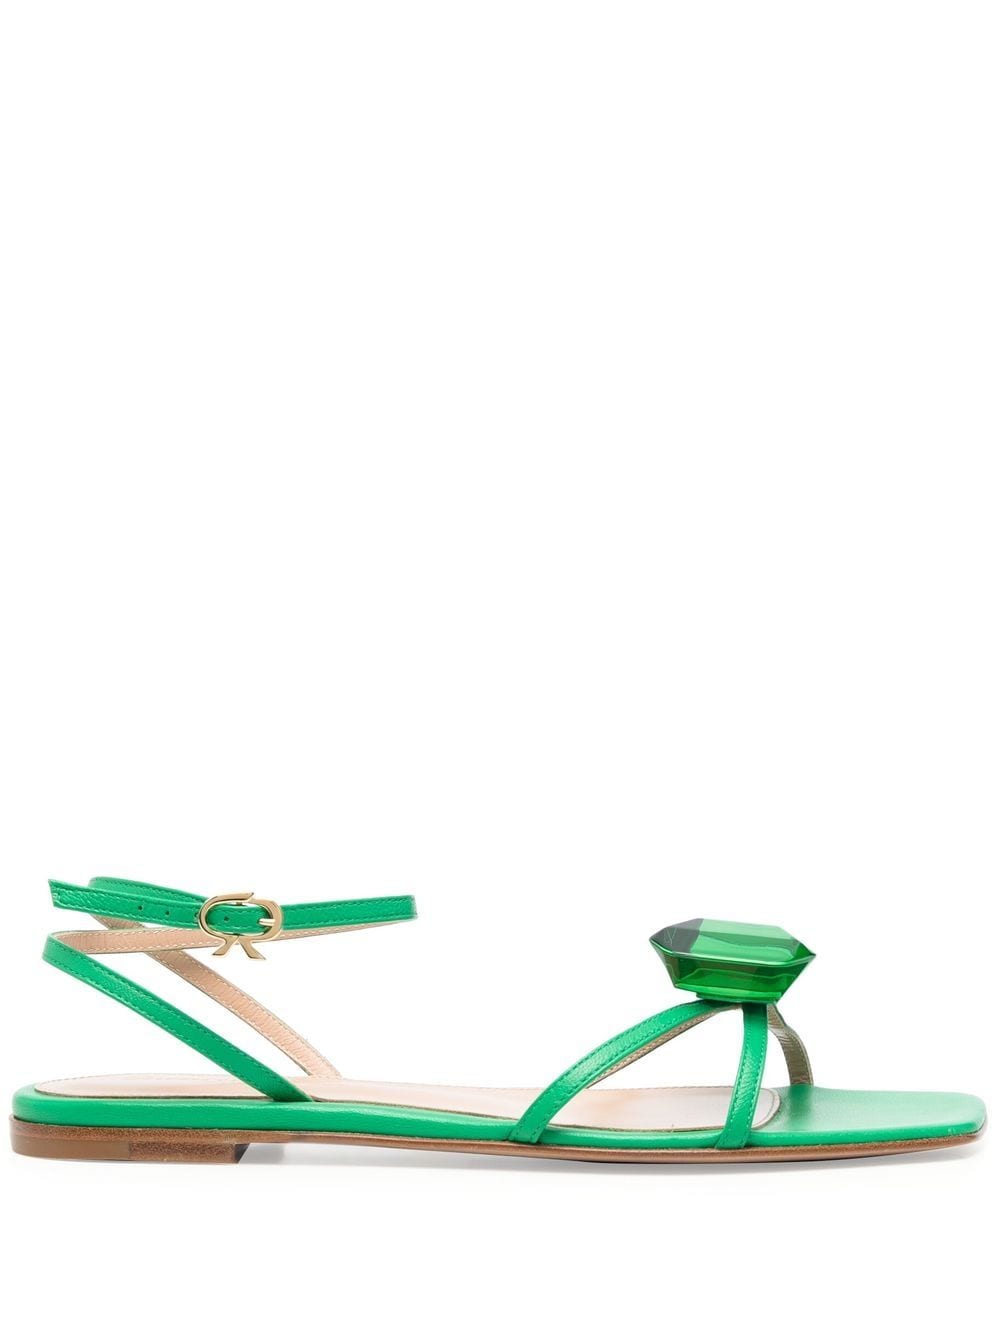 Gianvito Rossi embellished leather flat sandals - Green von Gianvito Rossi